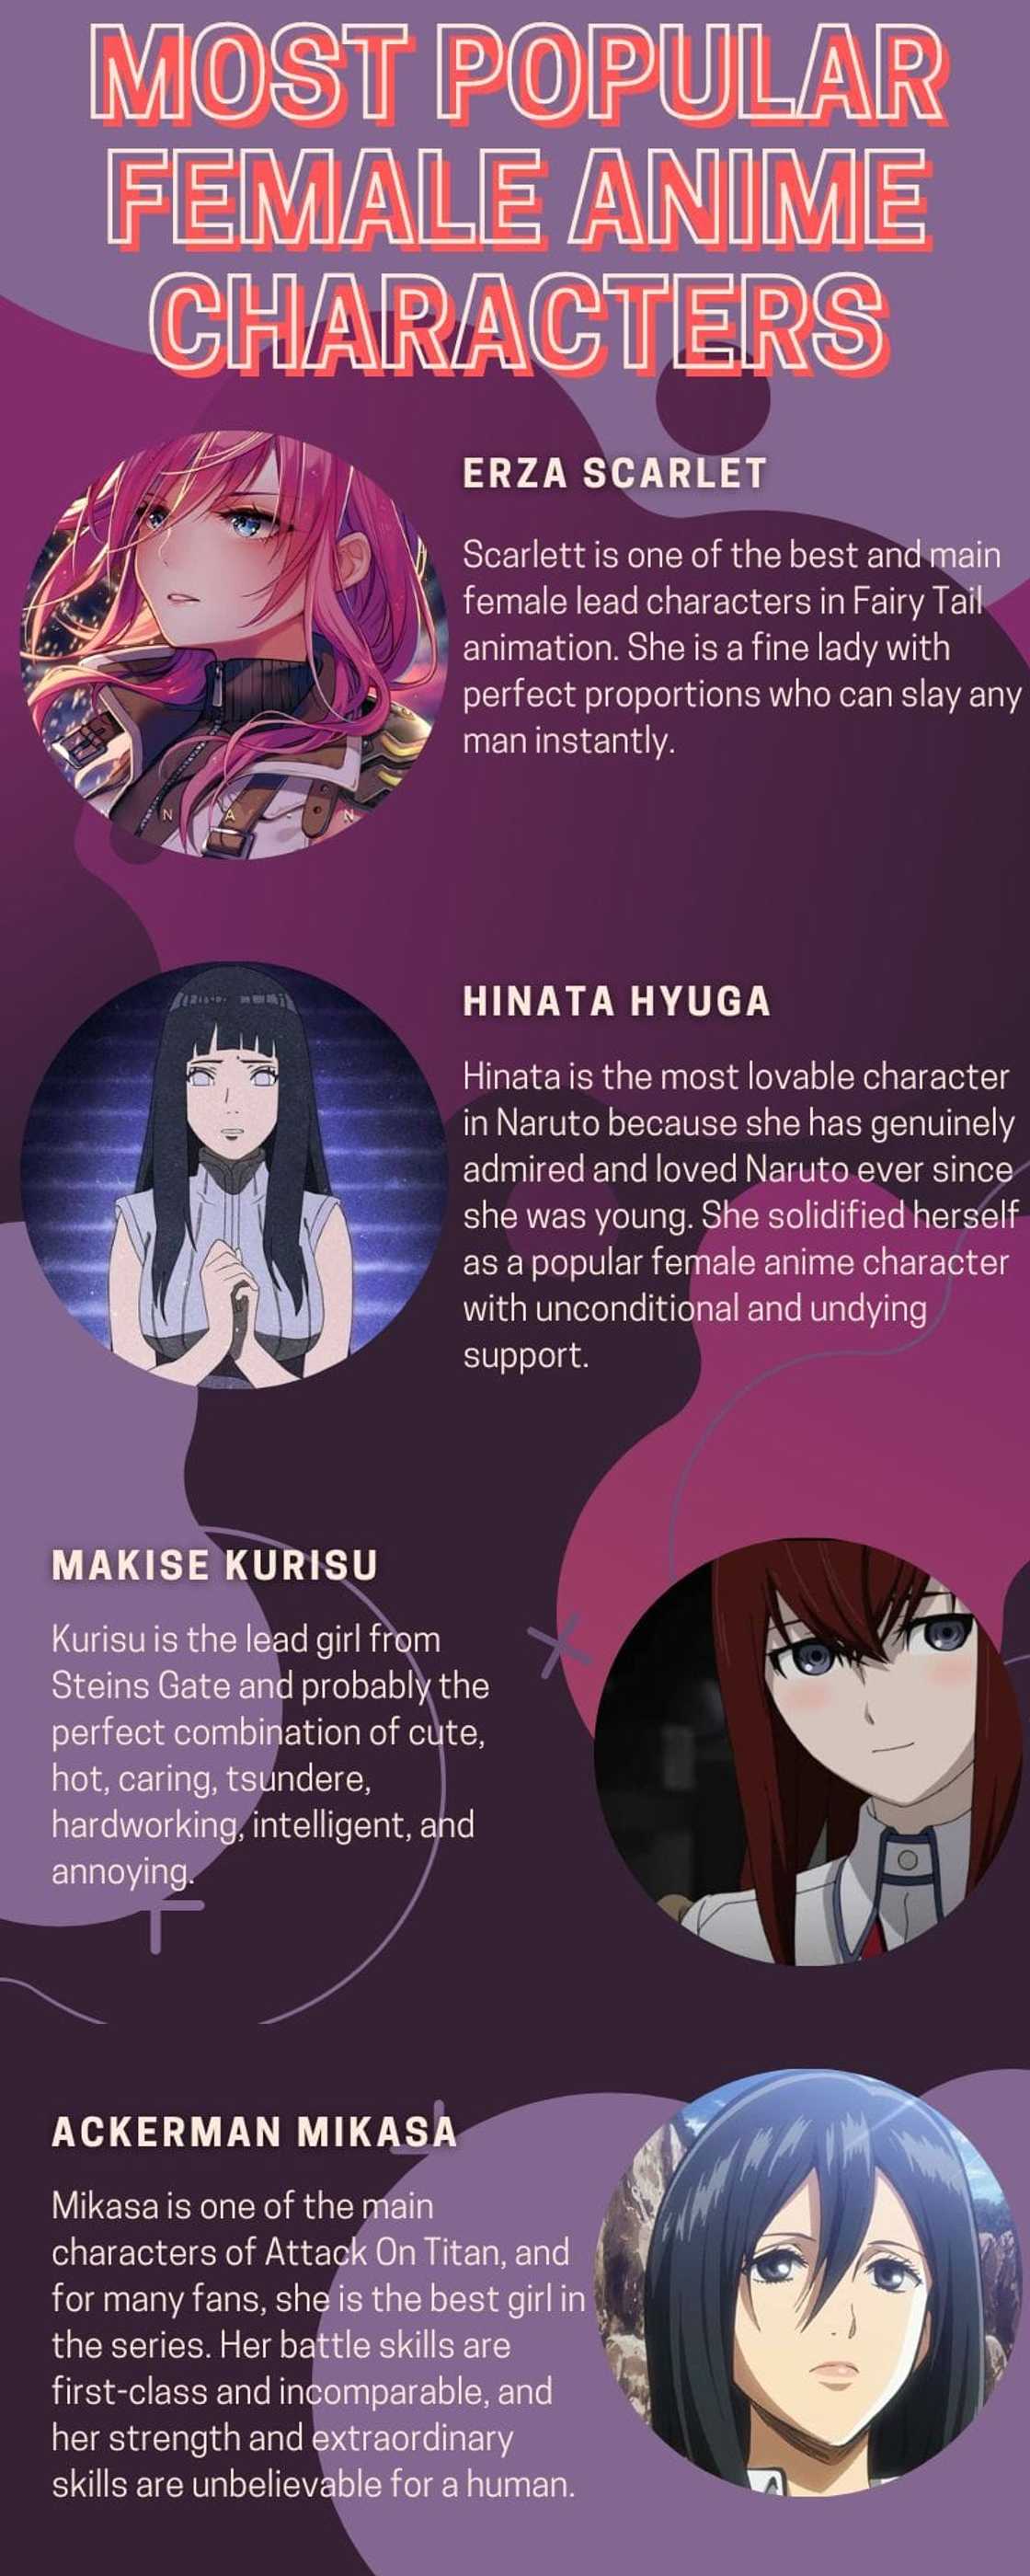 Most popular female anime characters